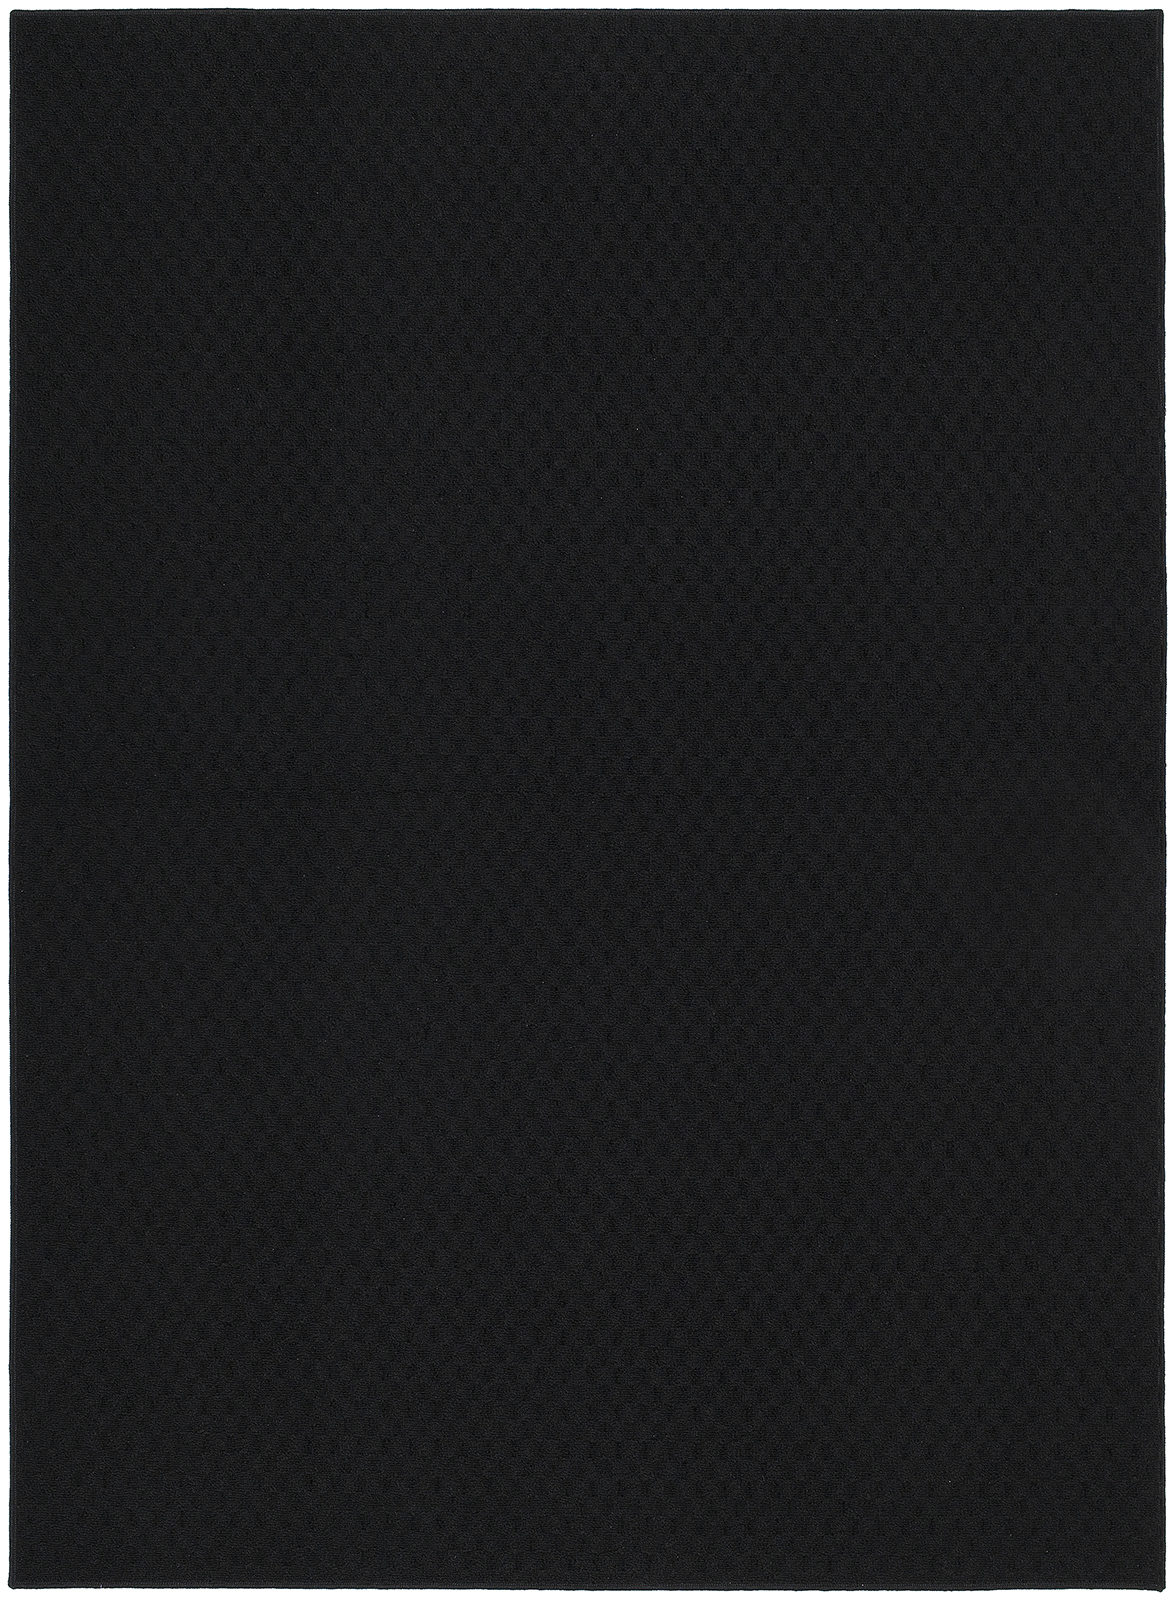 Garland Rug Town Square 45 In. x 66 In. Area Rug Black - image 1 of 3